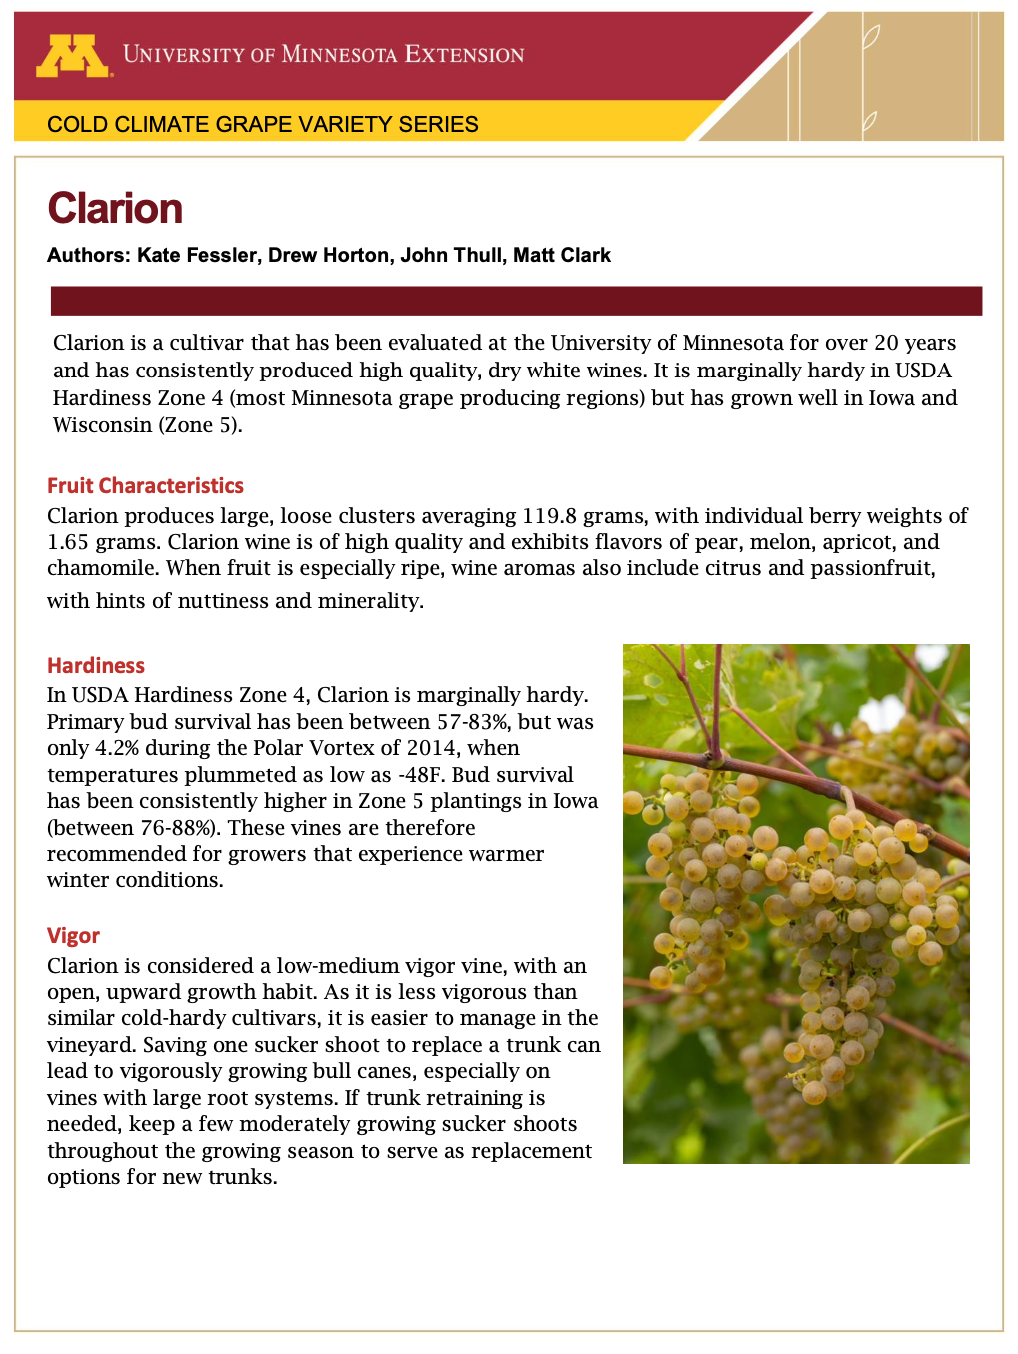 Image of the first page of the Clarion fact sheet